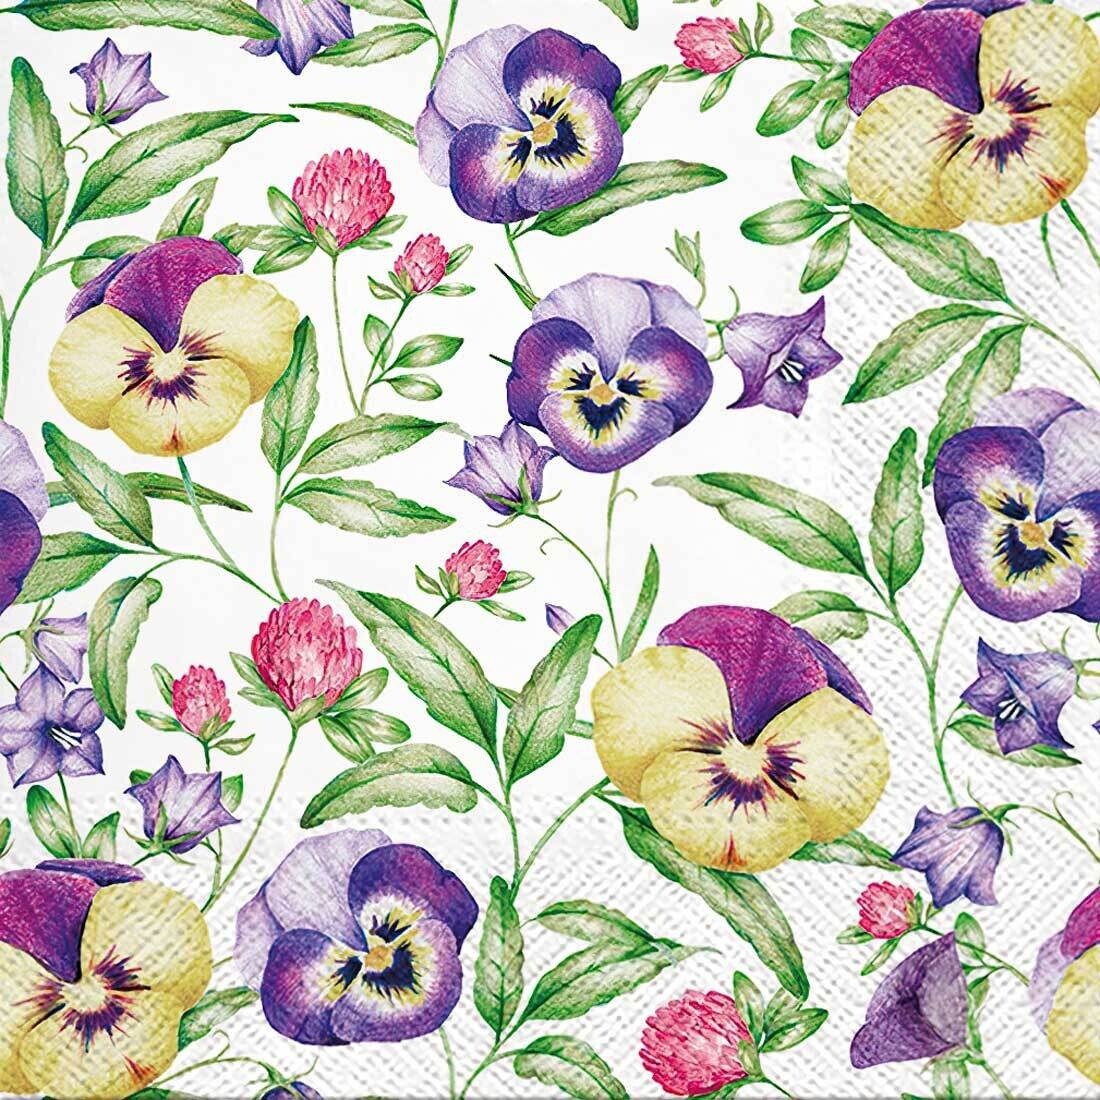 Decoupage Paper Napkins - Floral - Beautiful Pansies (1 Sheet) OUT OF STOCK